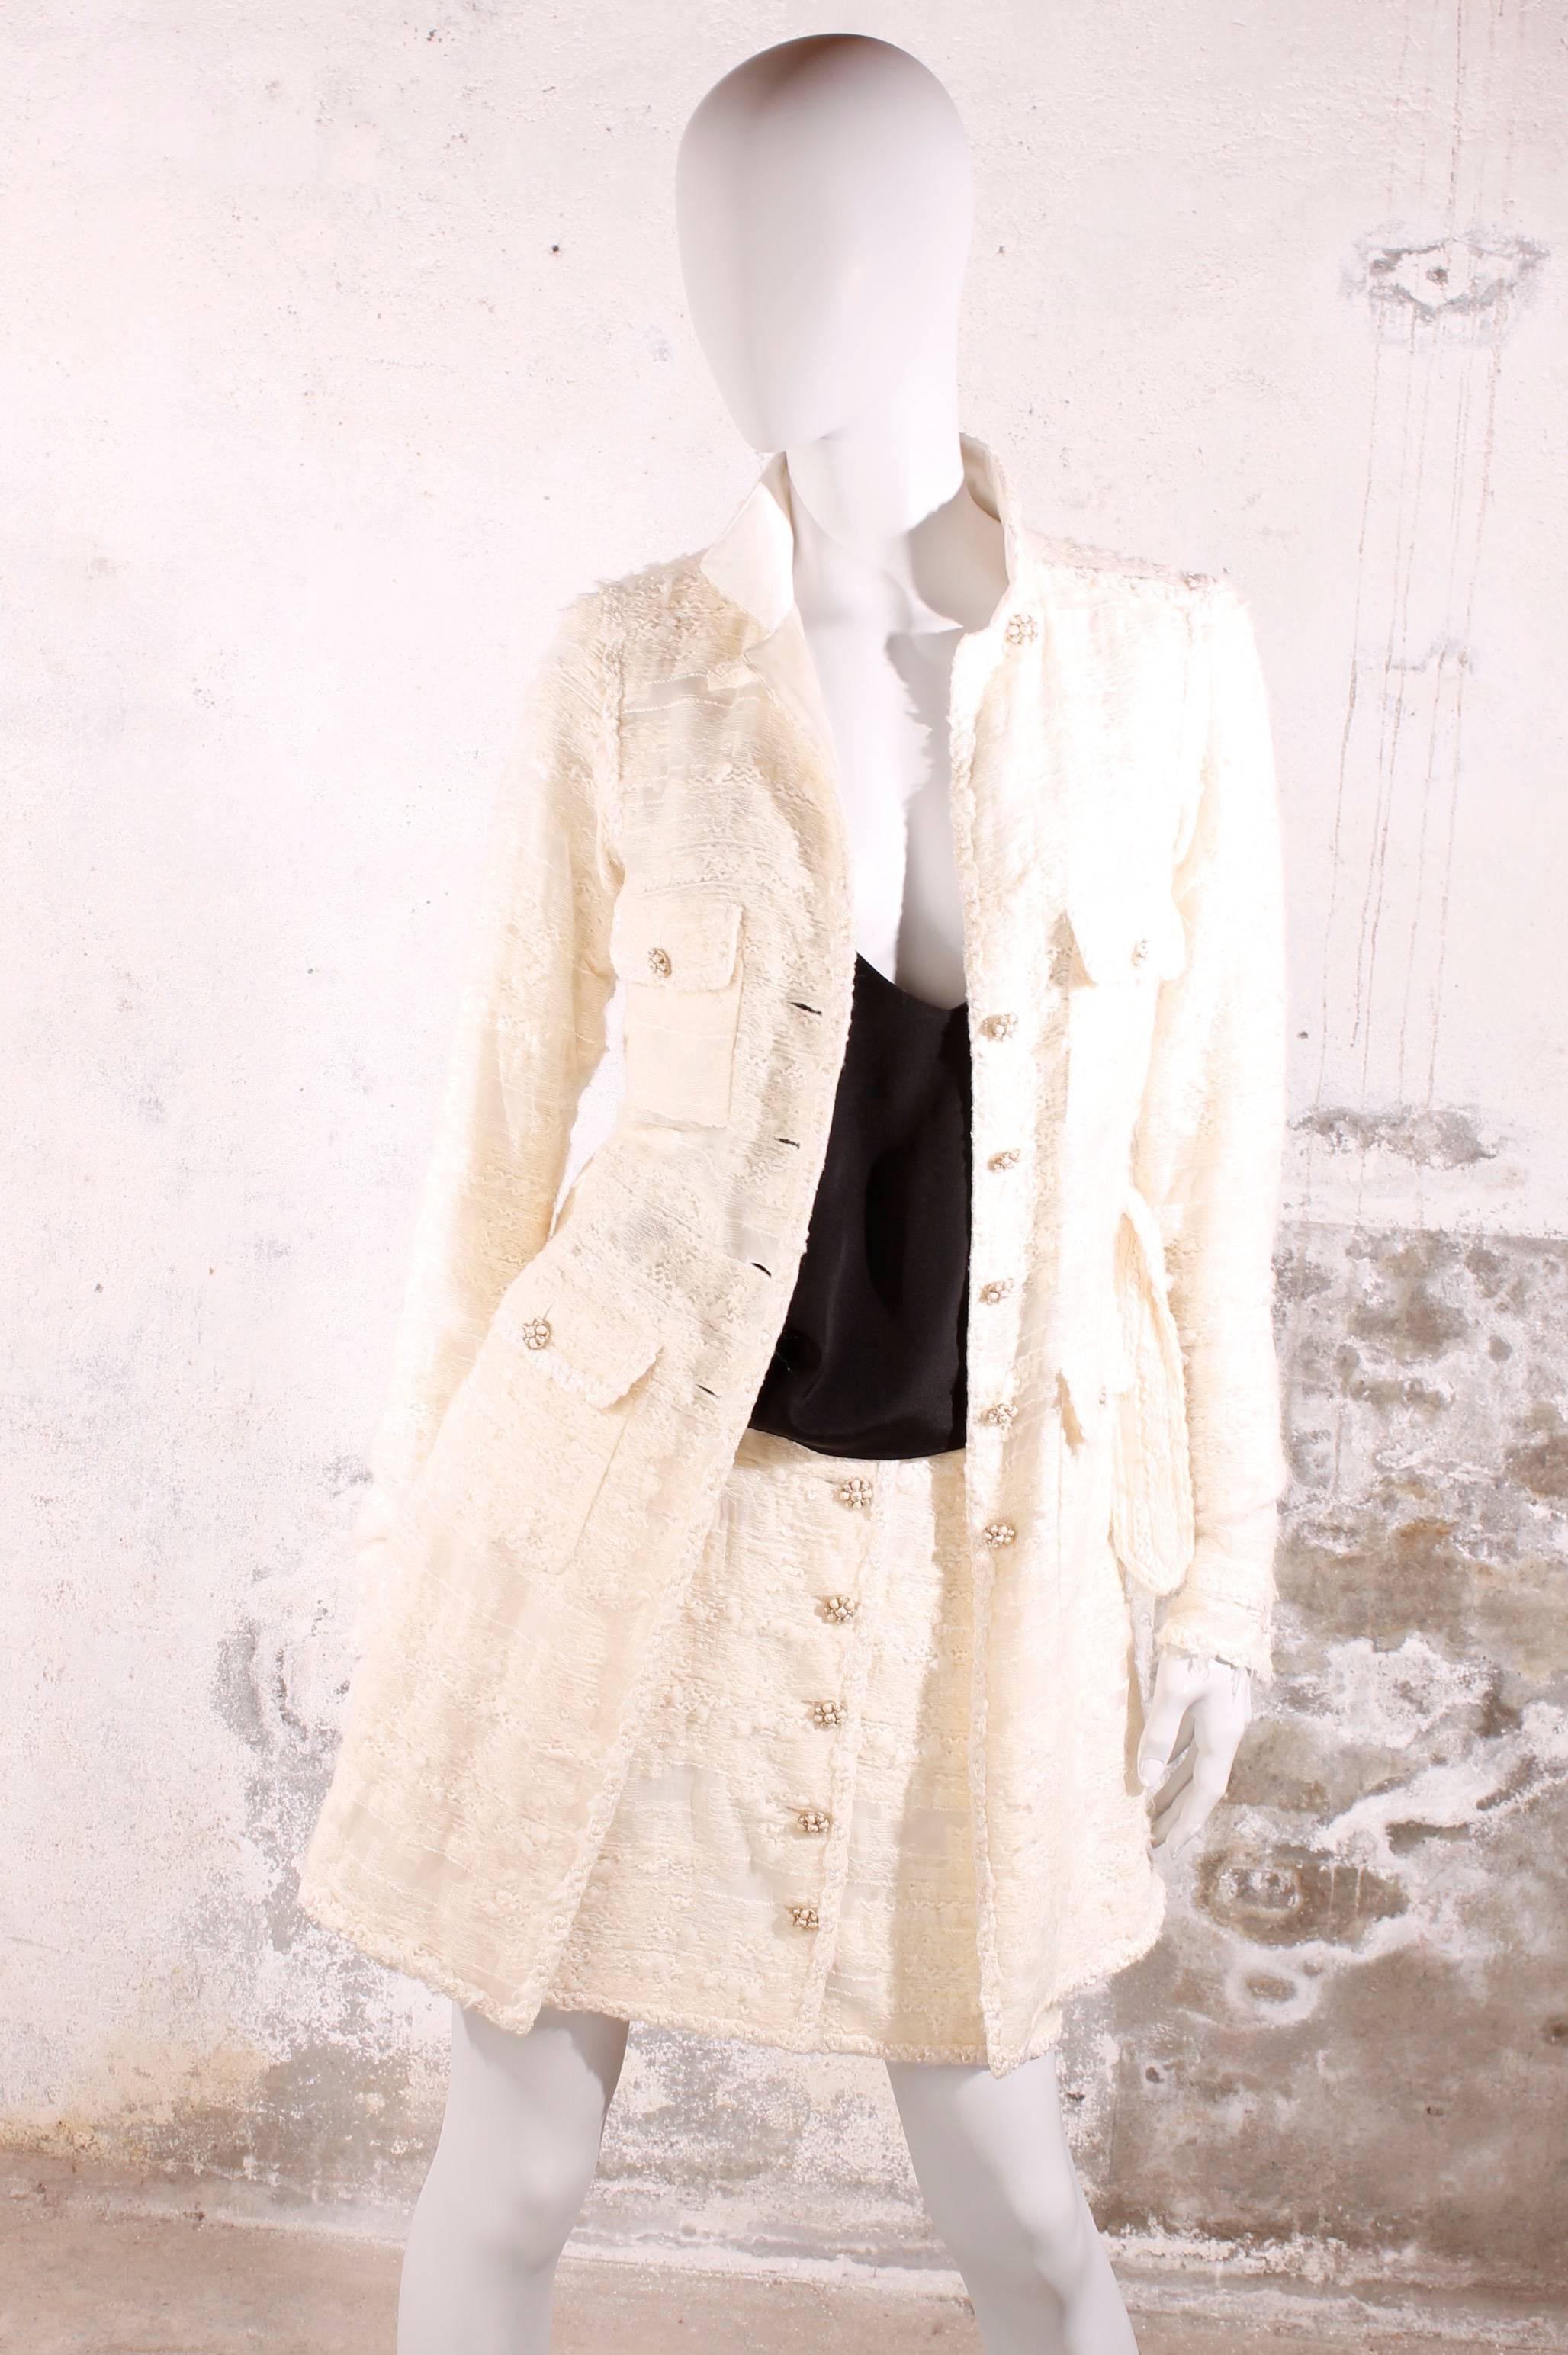 An off-white Chanel fairytale! New and never worn, tags still attached!

This two-piece suit has a long coat and a matching A-line skirt,

A little collar on the jacket and four flap pockets at the front, all with one button made of off-white